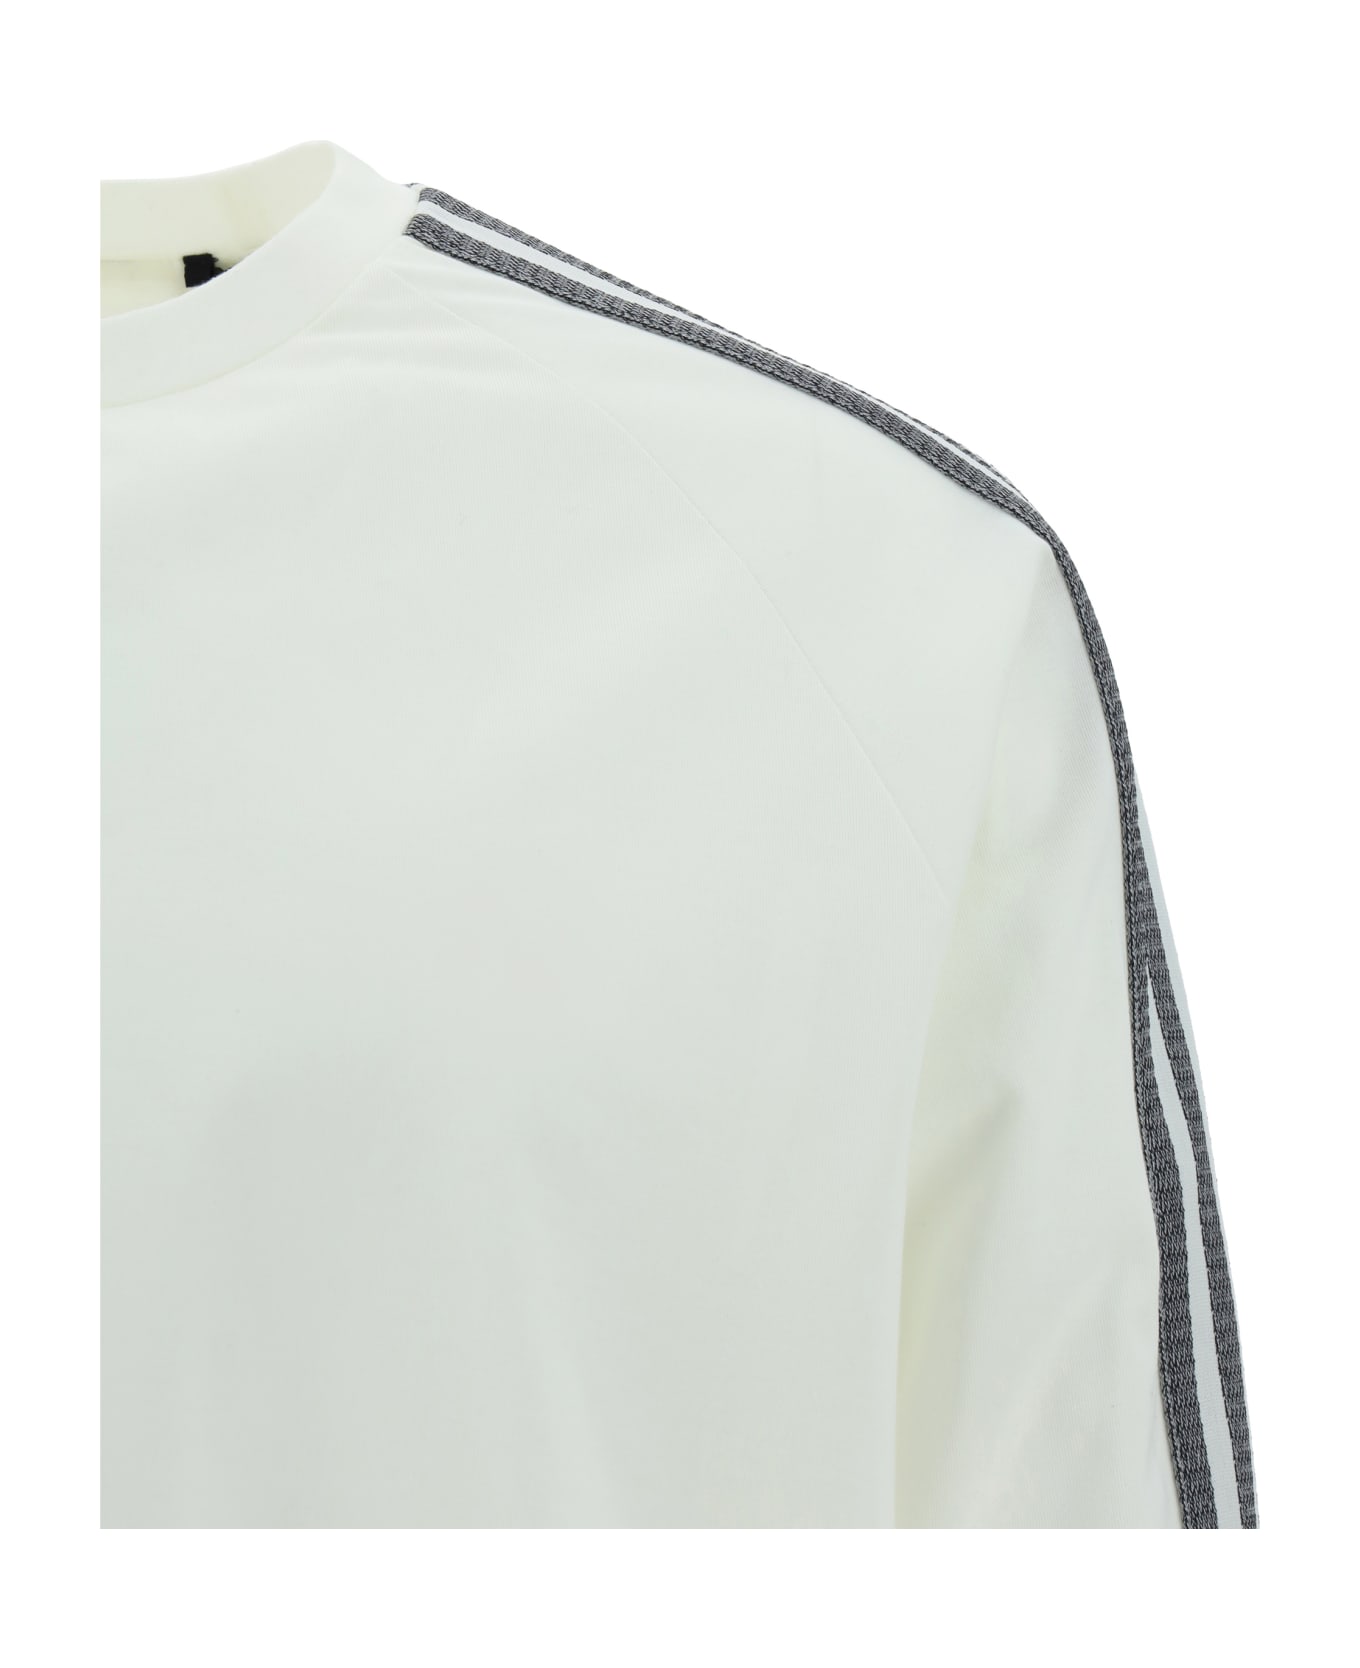 Y-3 Long Sleeve Jersey - Owhite